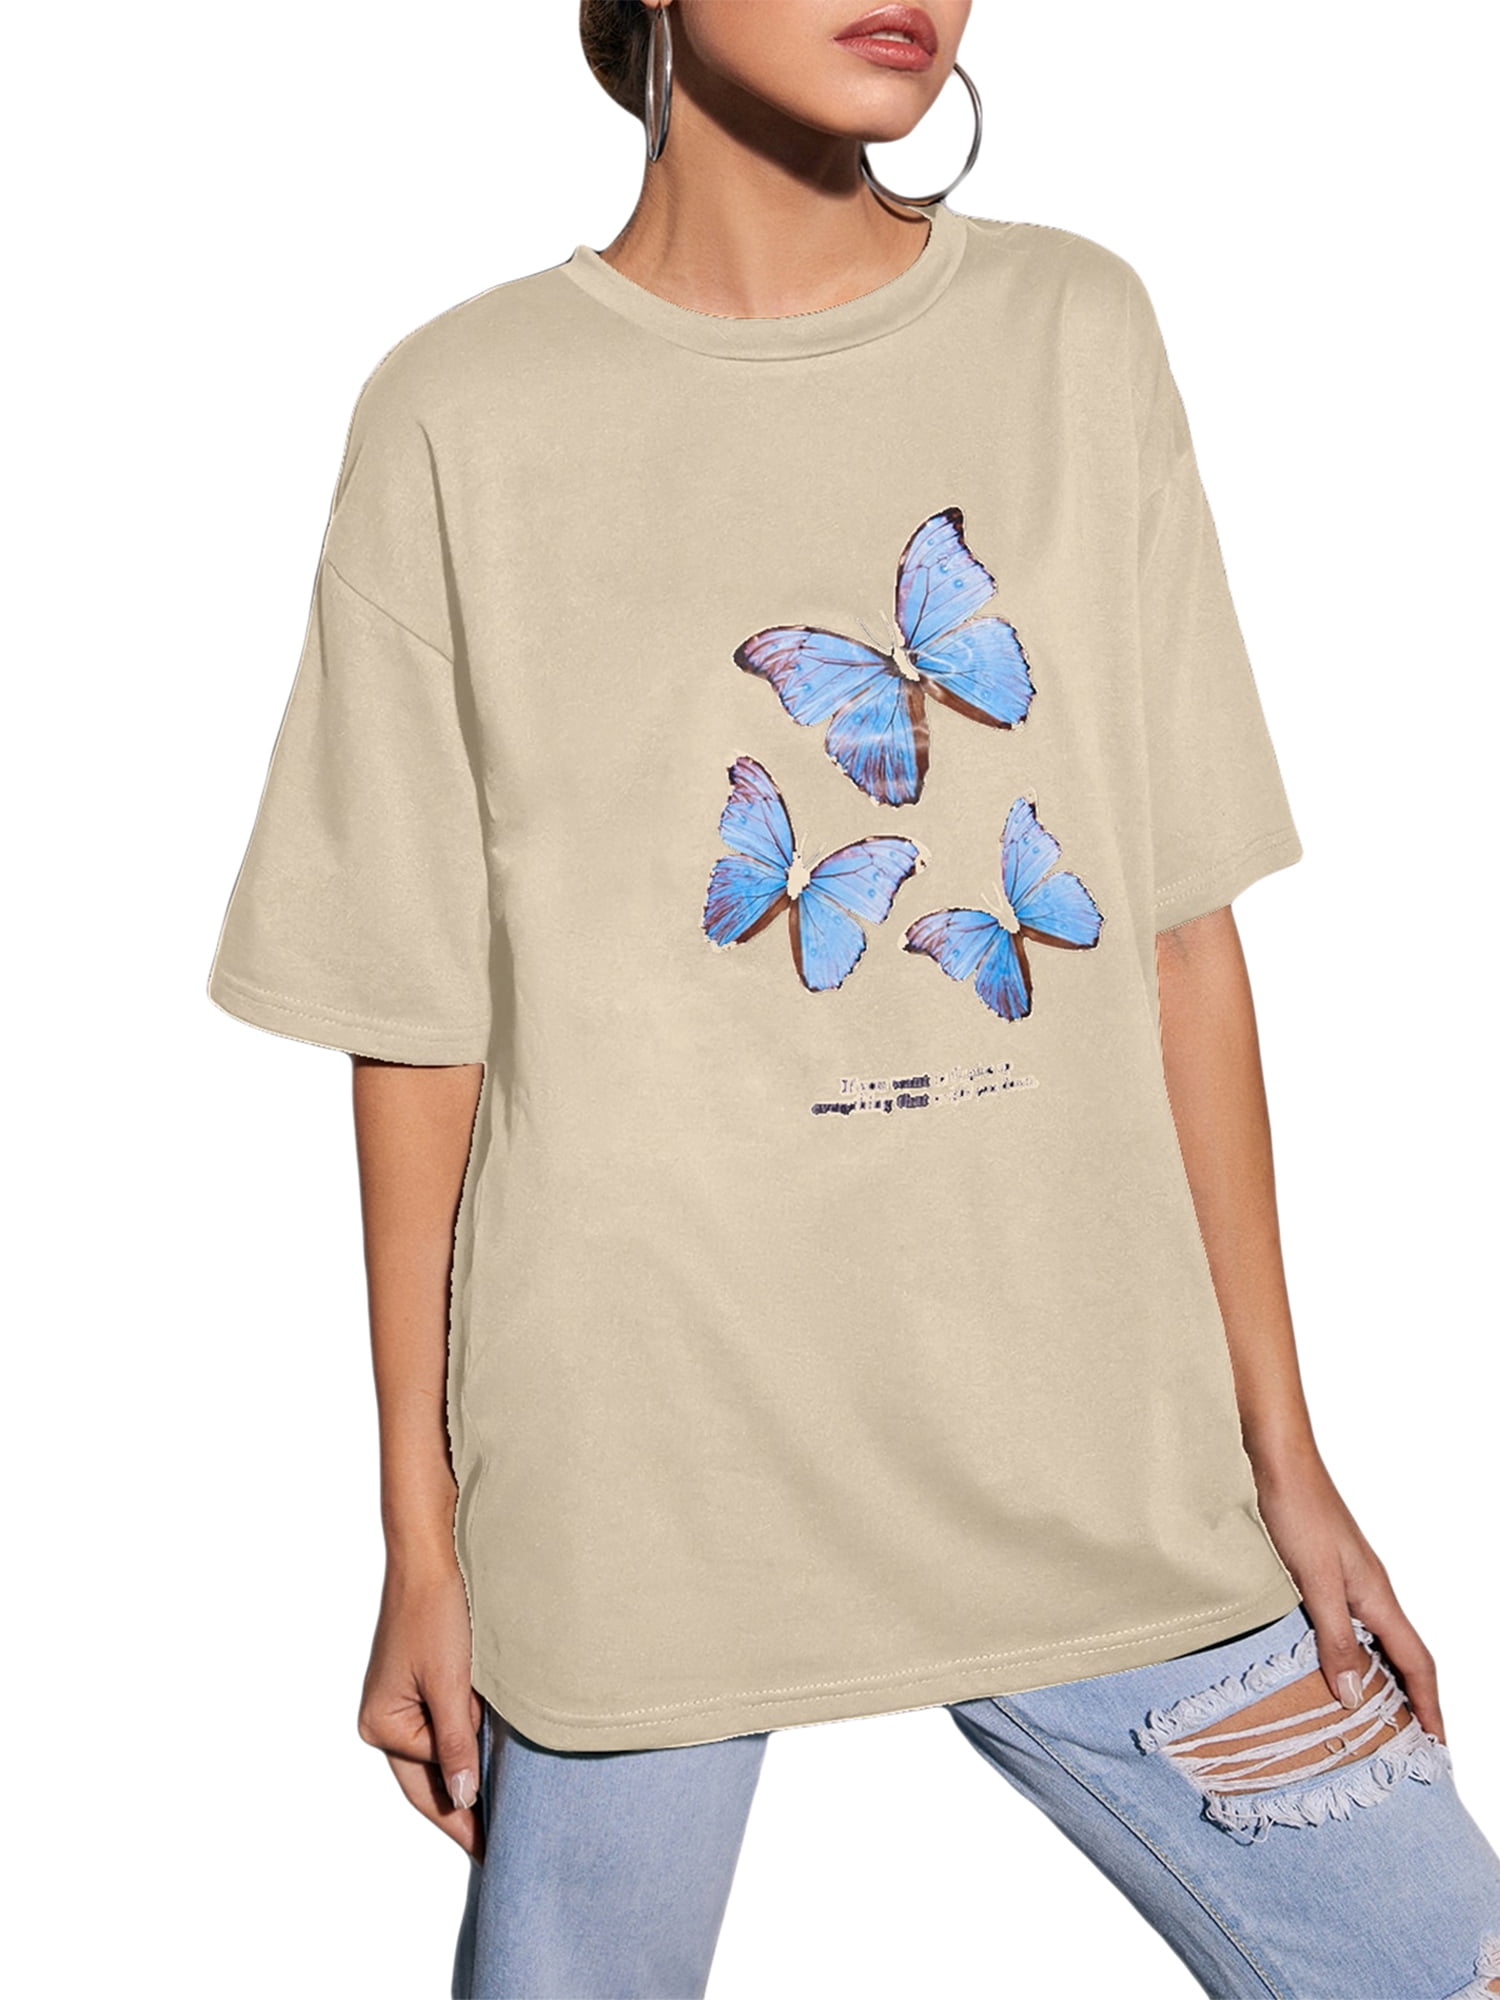 Ladies Organic Cotton T shirt with an attractive butterfly design.